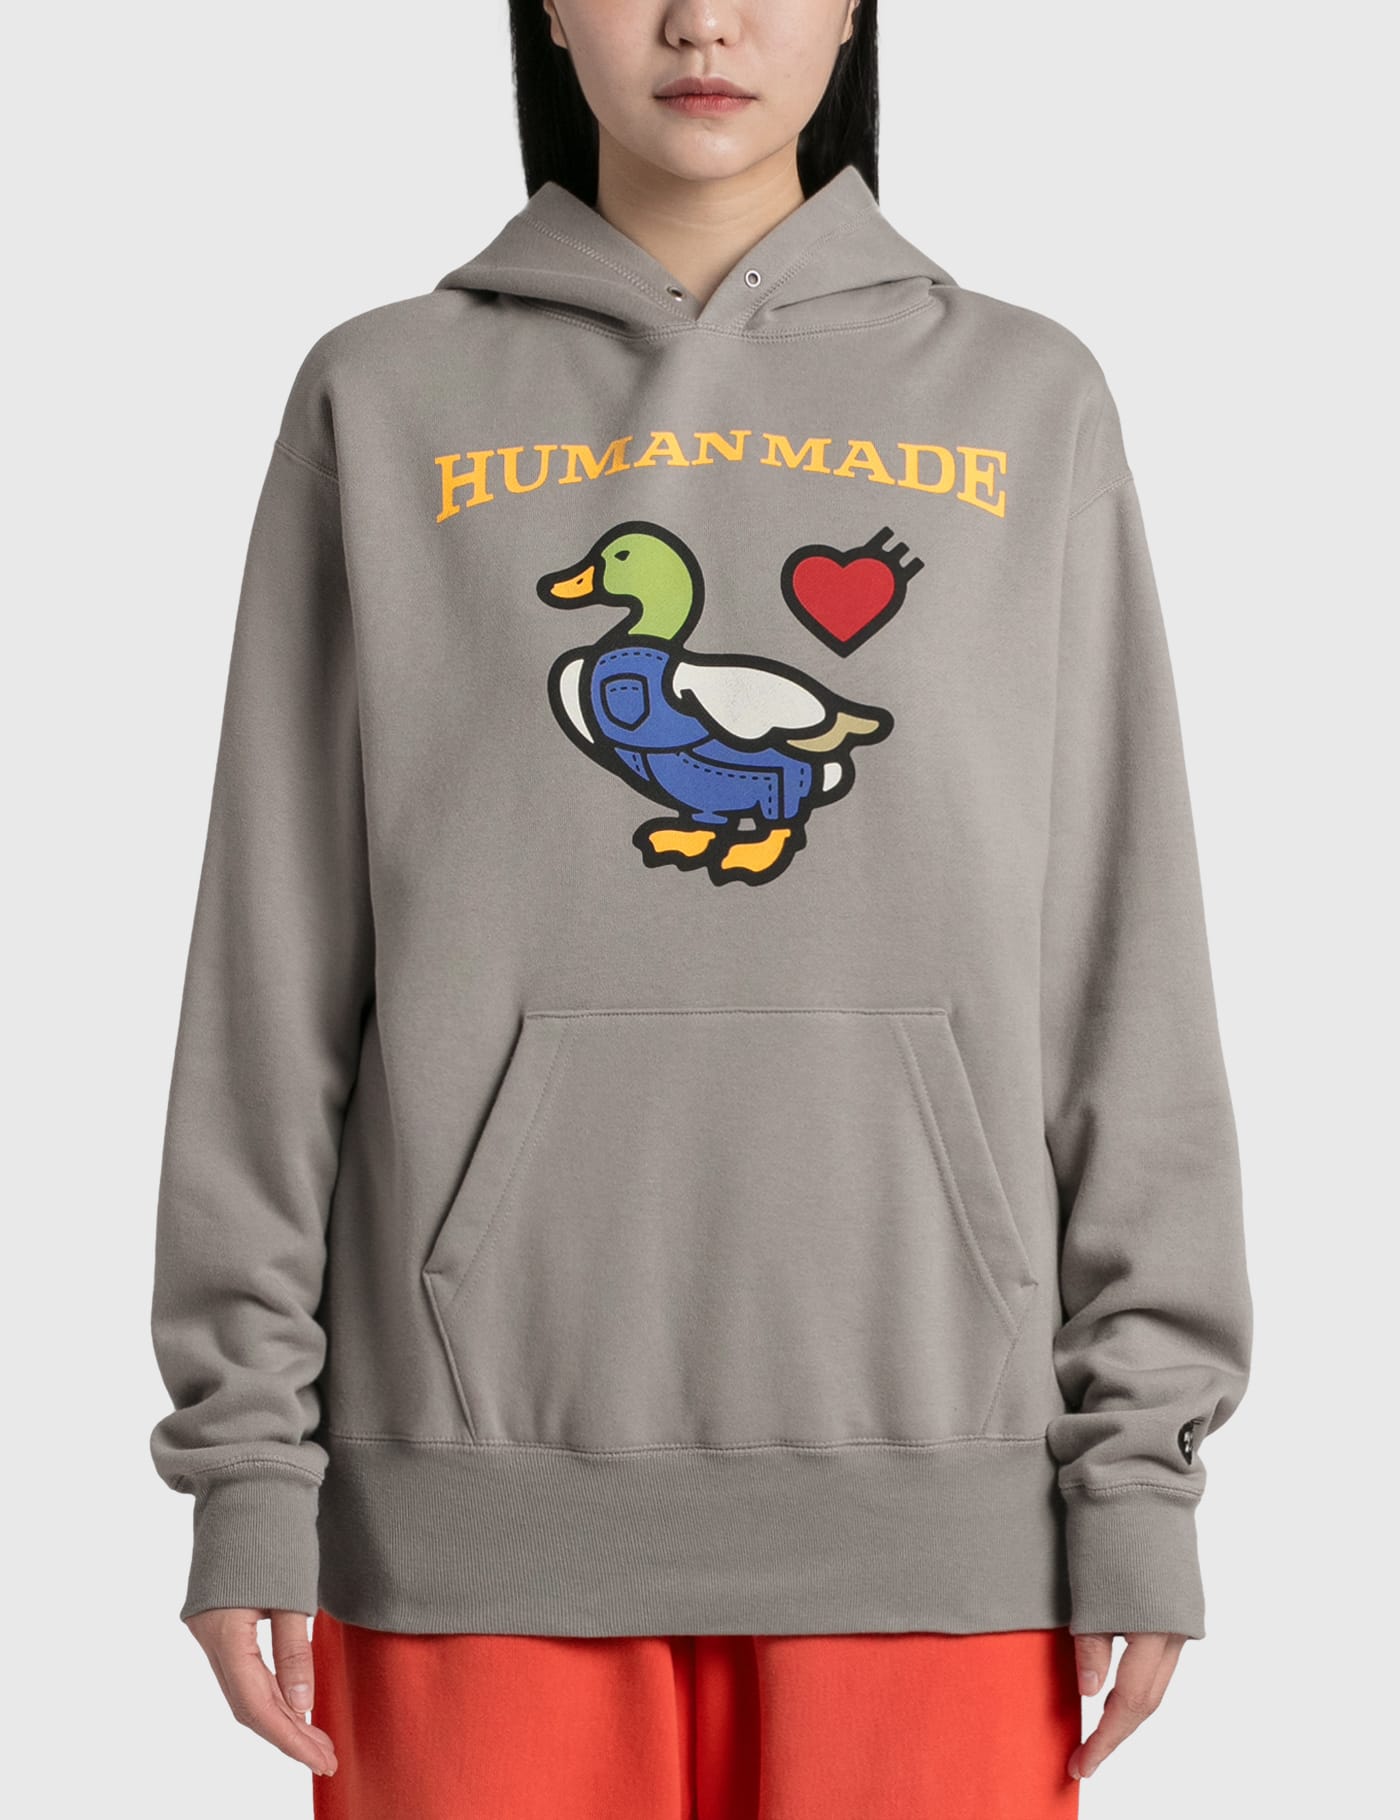 Human Made - Duck Hoodie | HBX - Globally Curated Fashion and